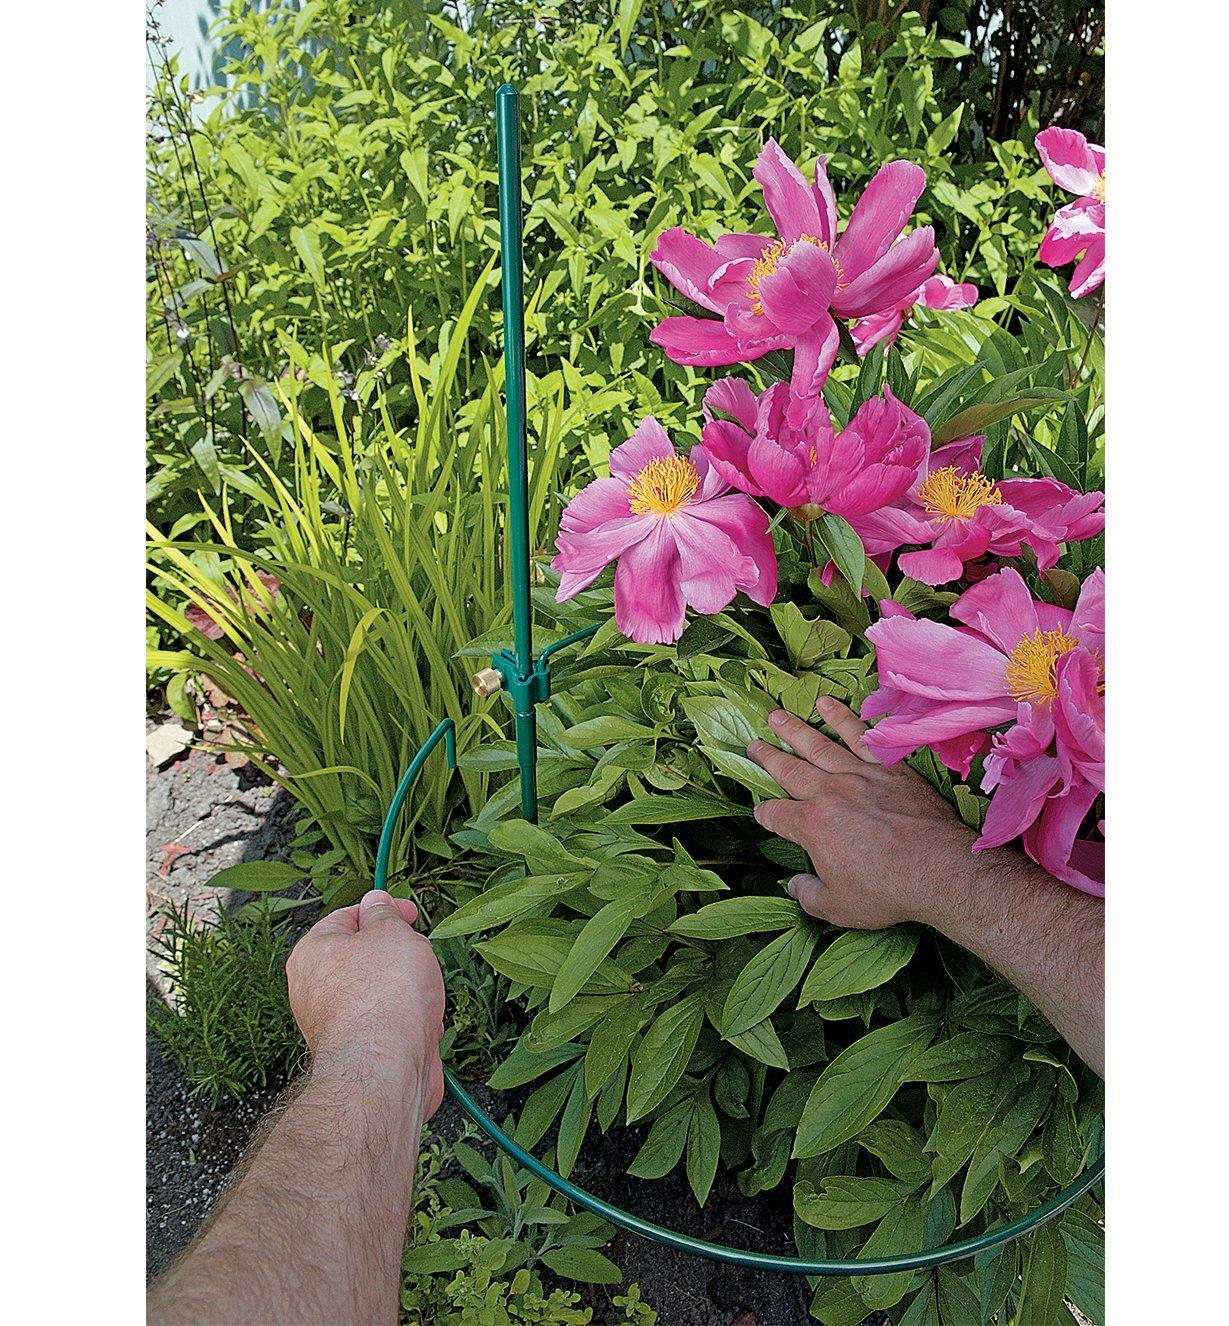 18" Peony Hoop supporting peony plant in a garden